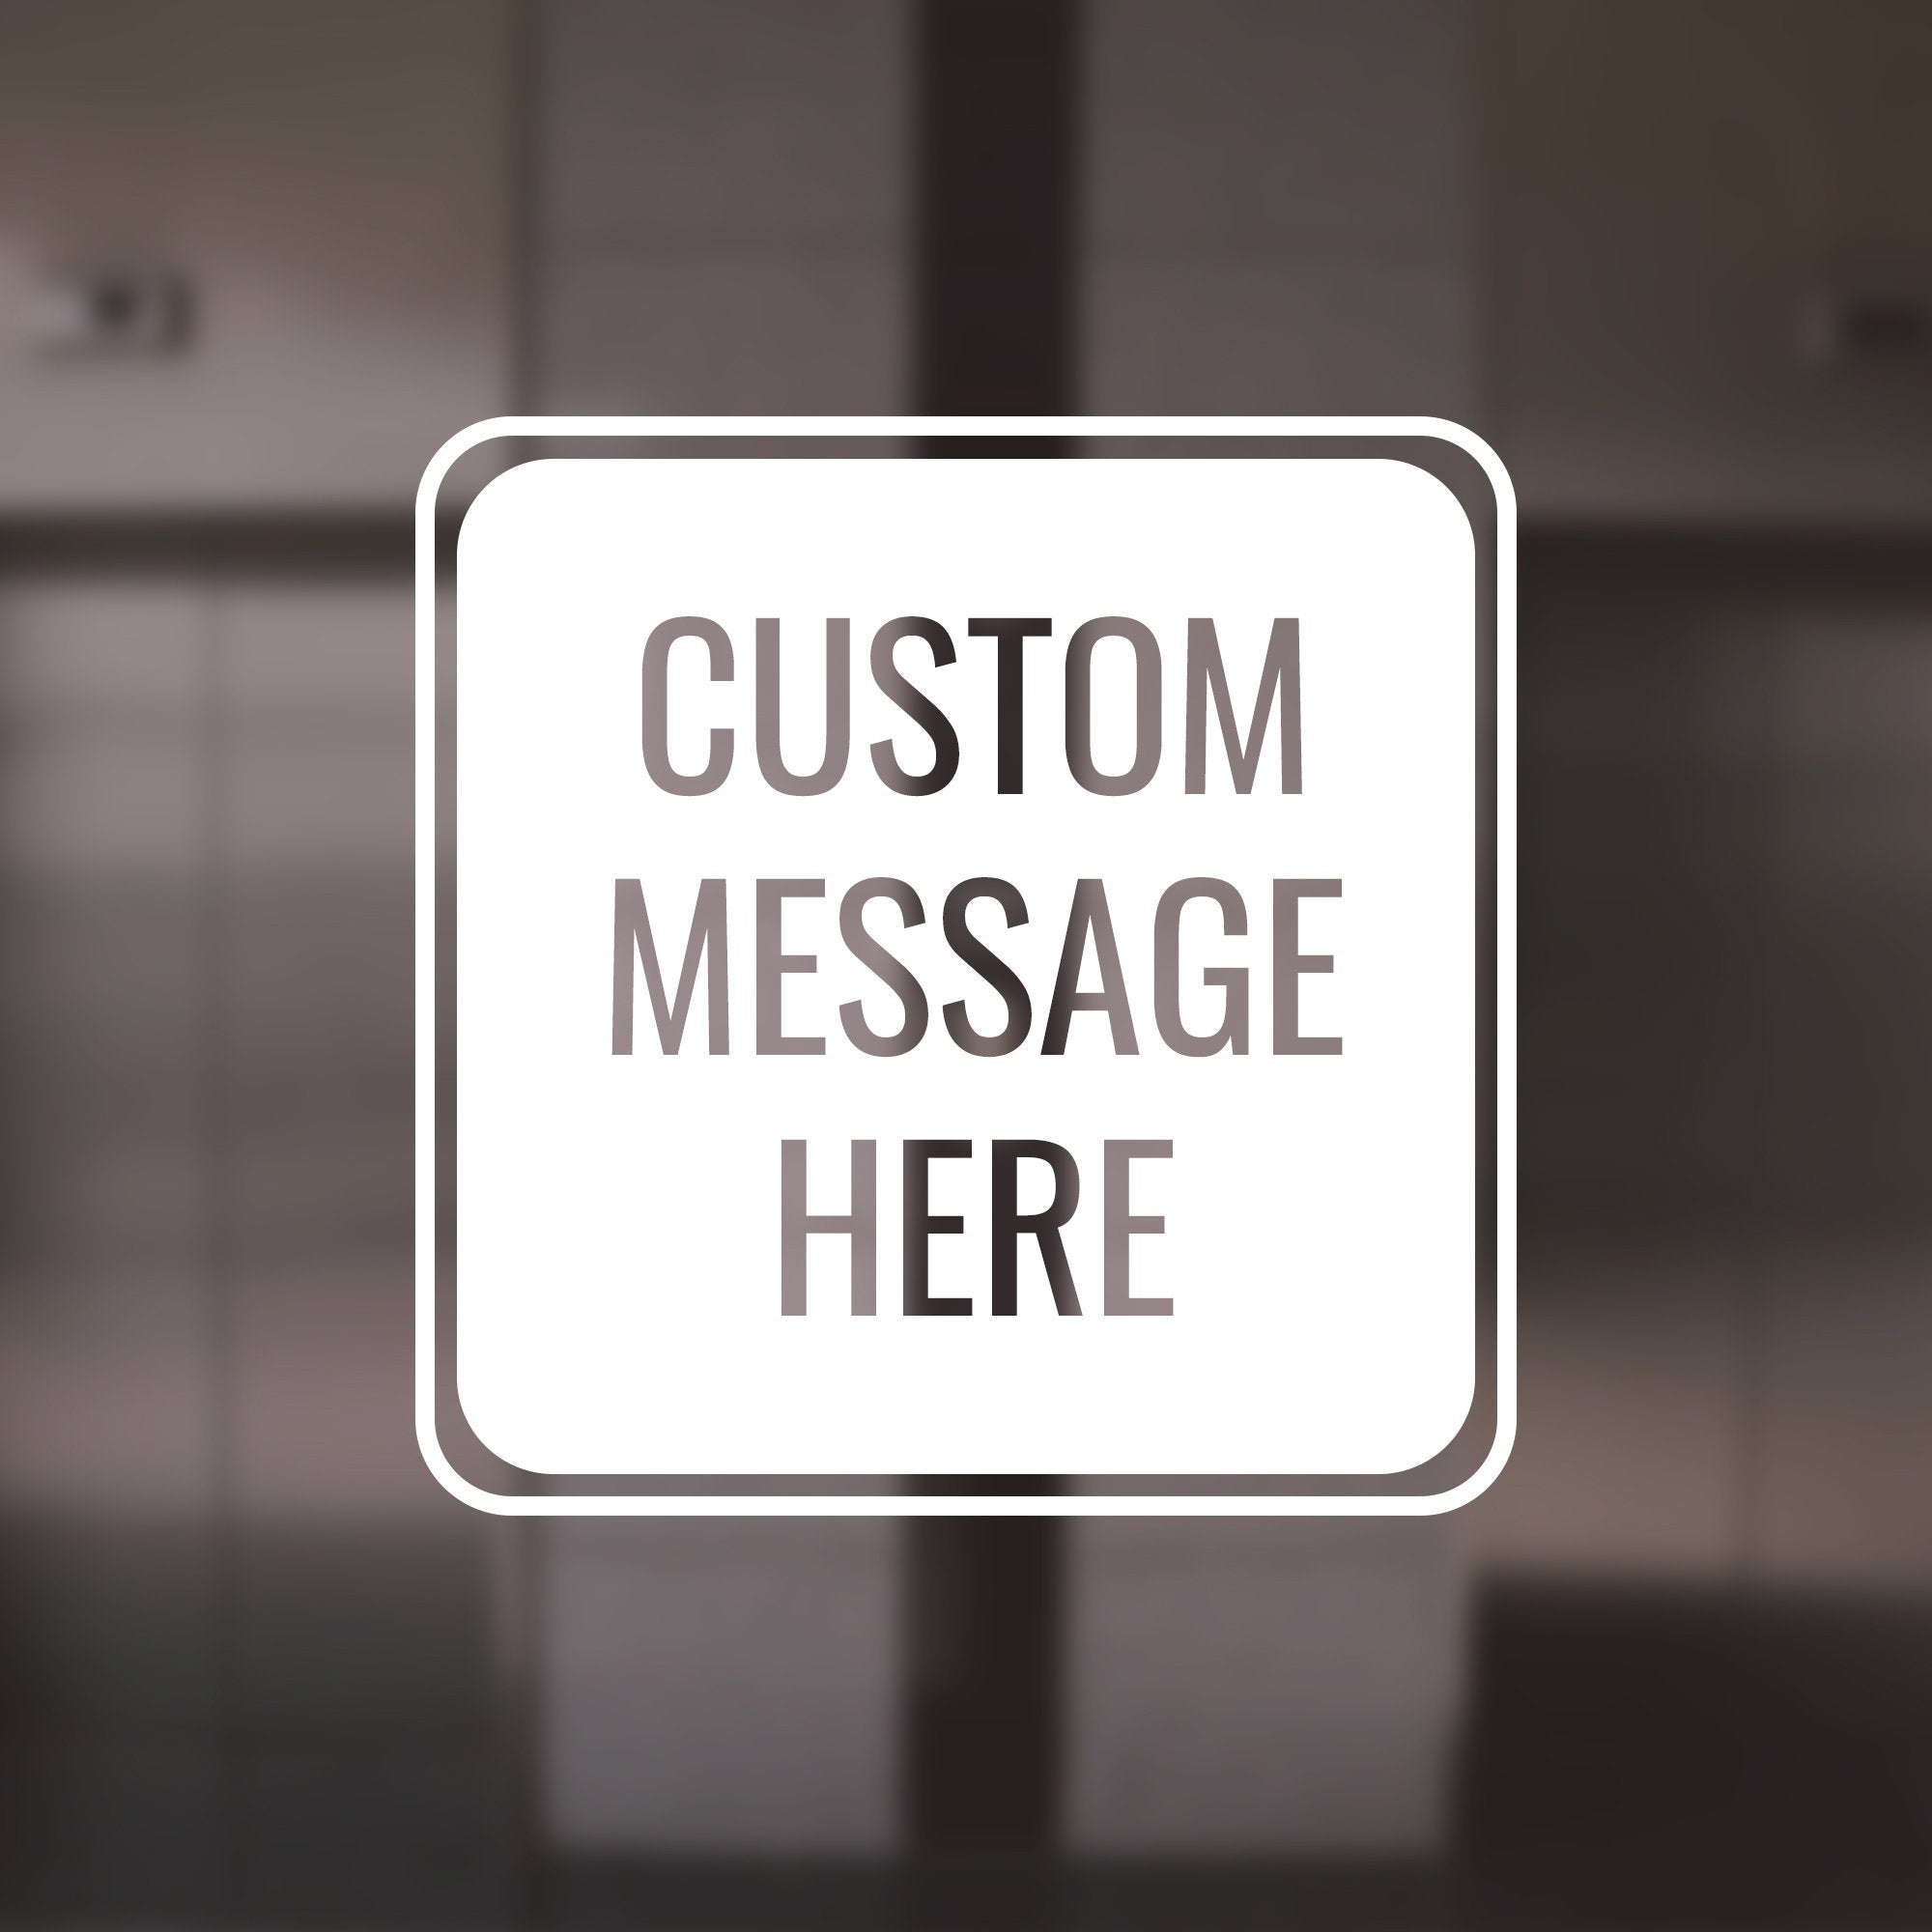 Custom Message Here Square- Personalized Square Vinyl Decal for Windows, Doors, Walls for Hotels, Restaurants, Local Businesses, Bars, and More!